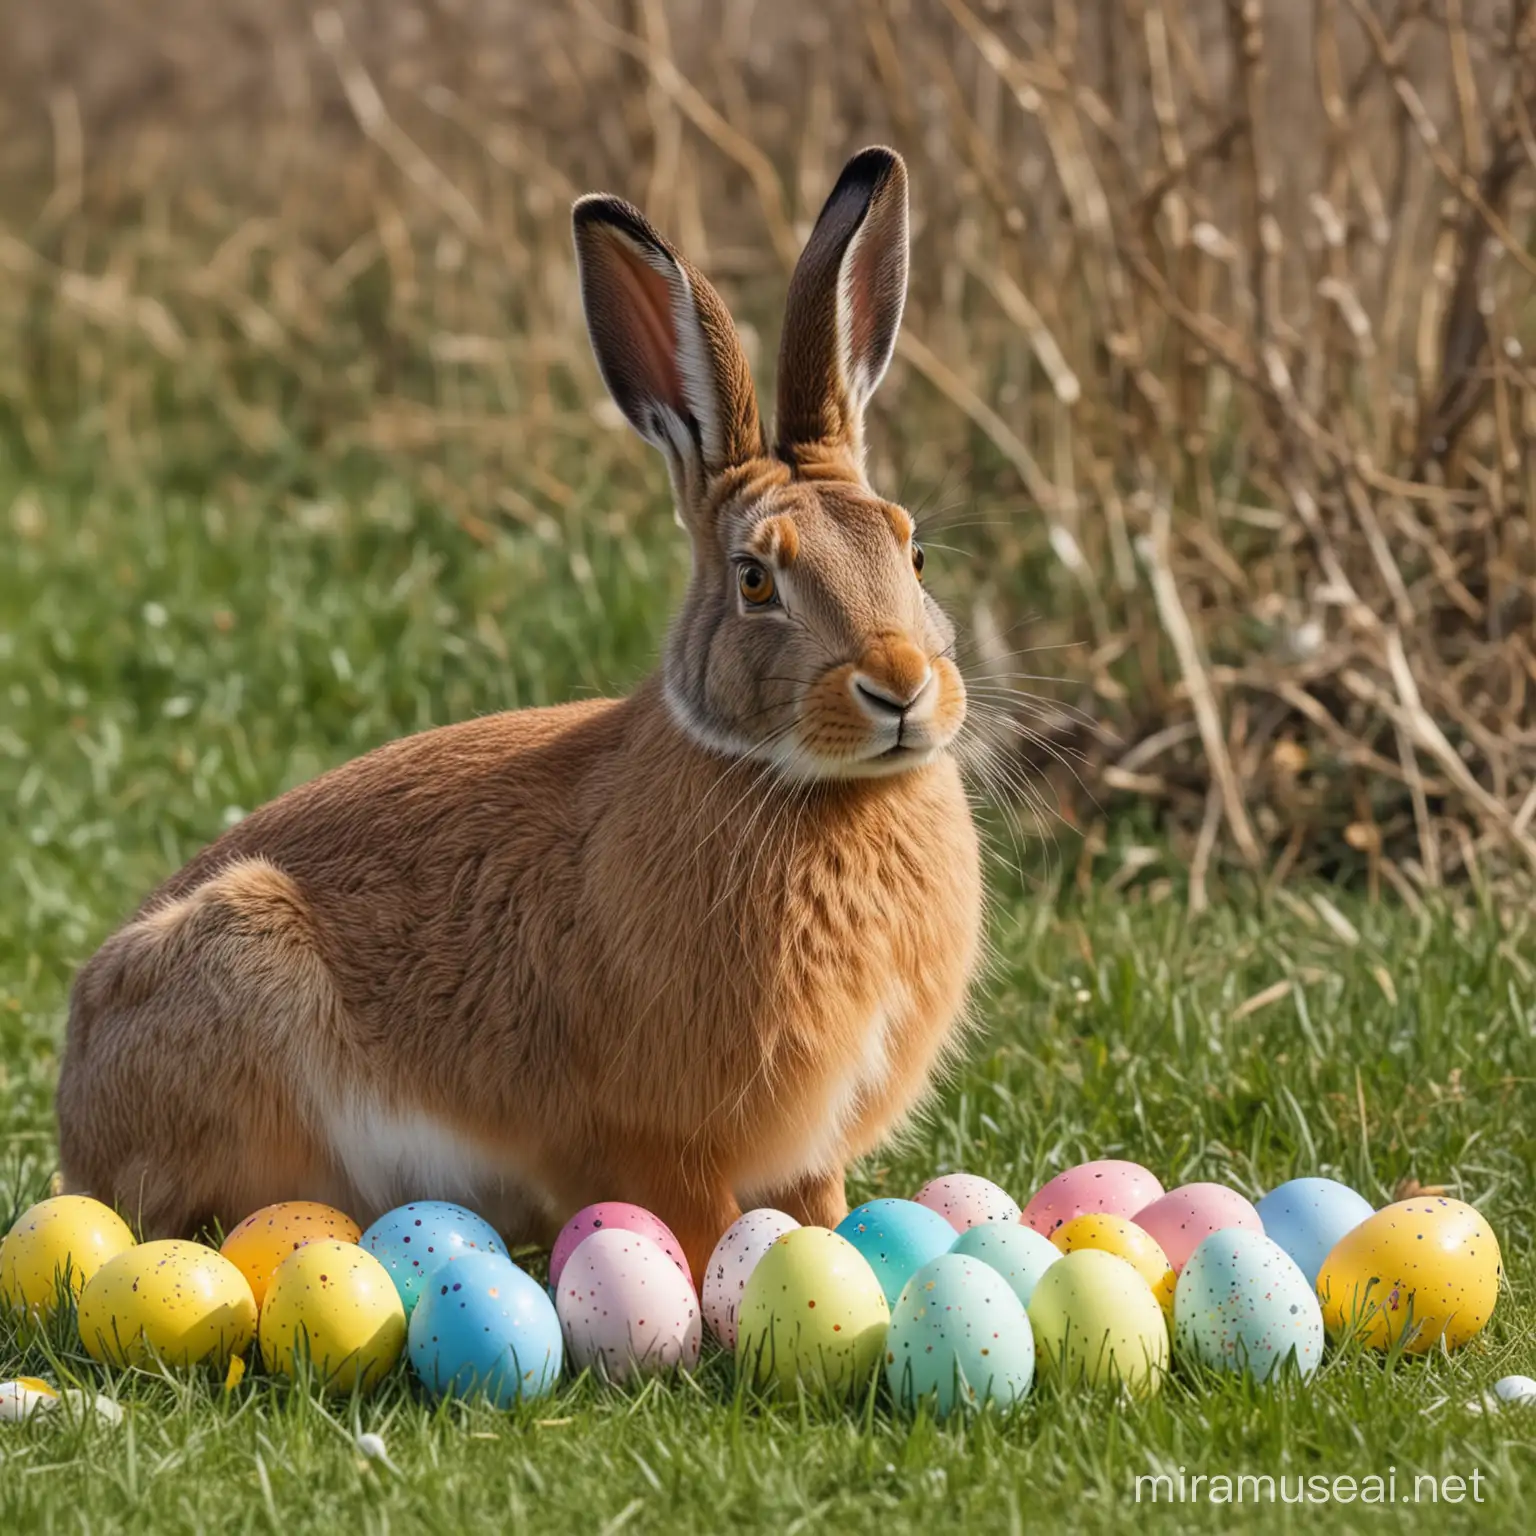 Hare with easter eggs outside
